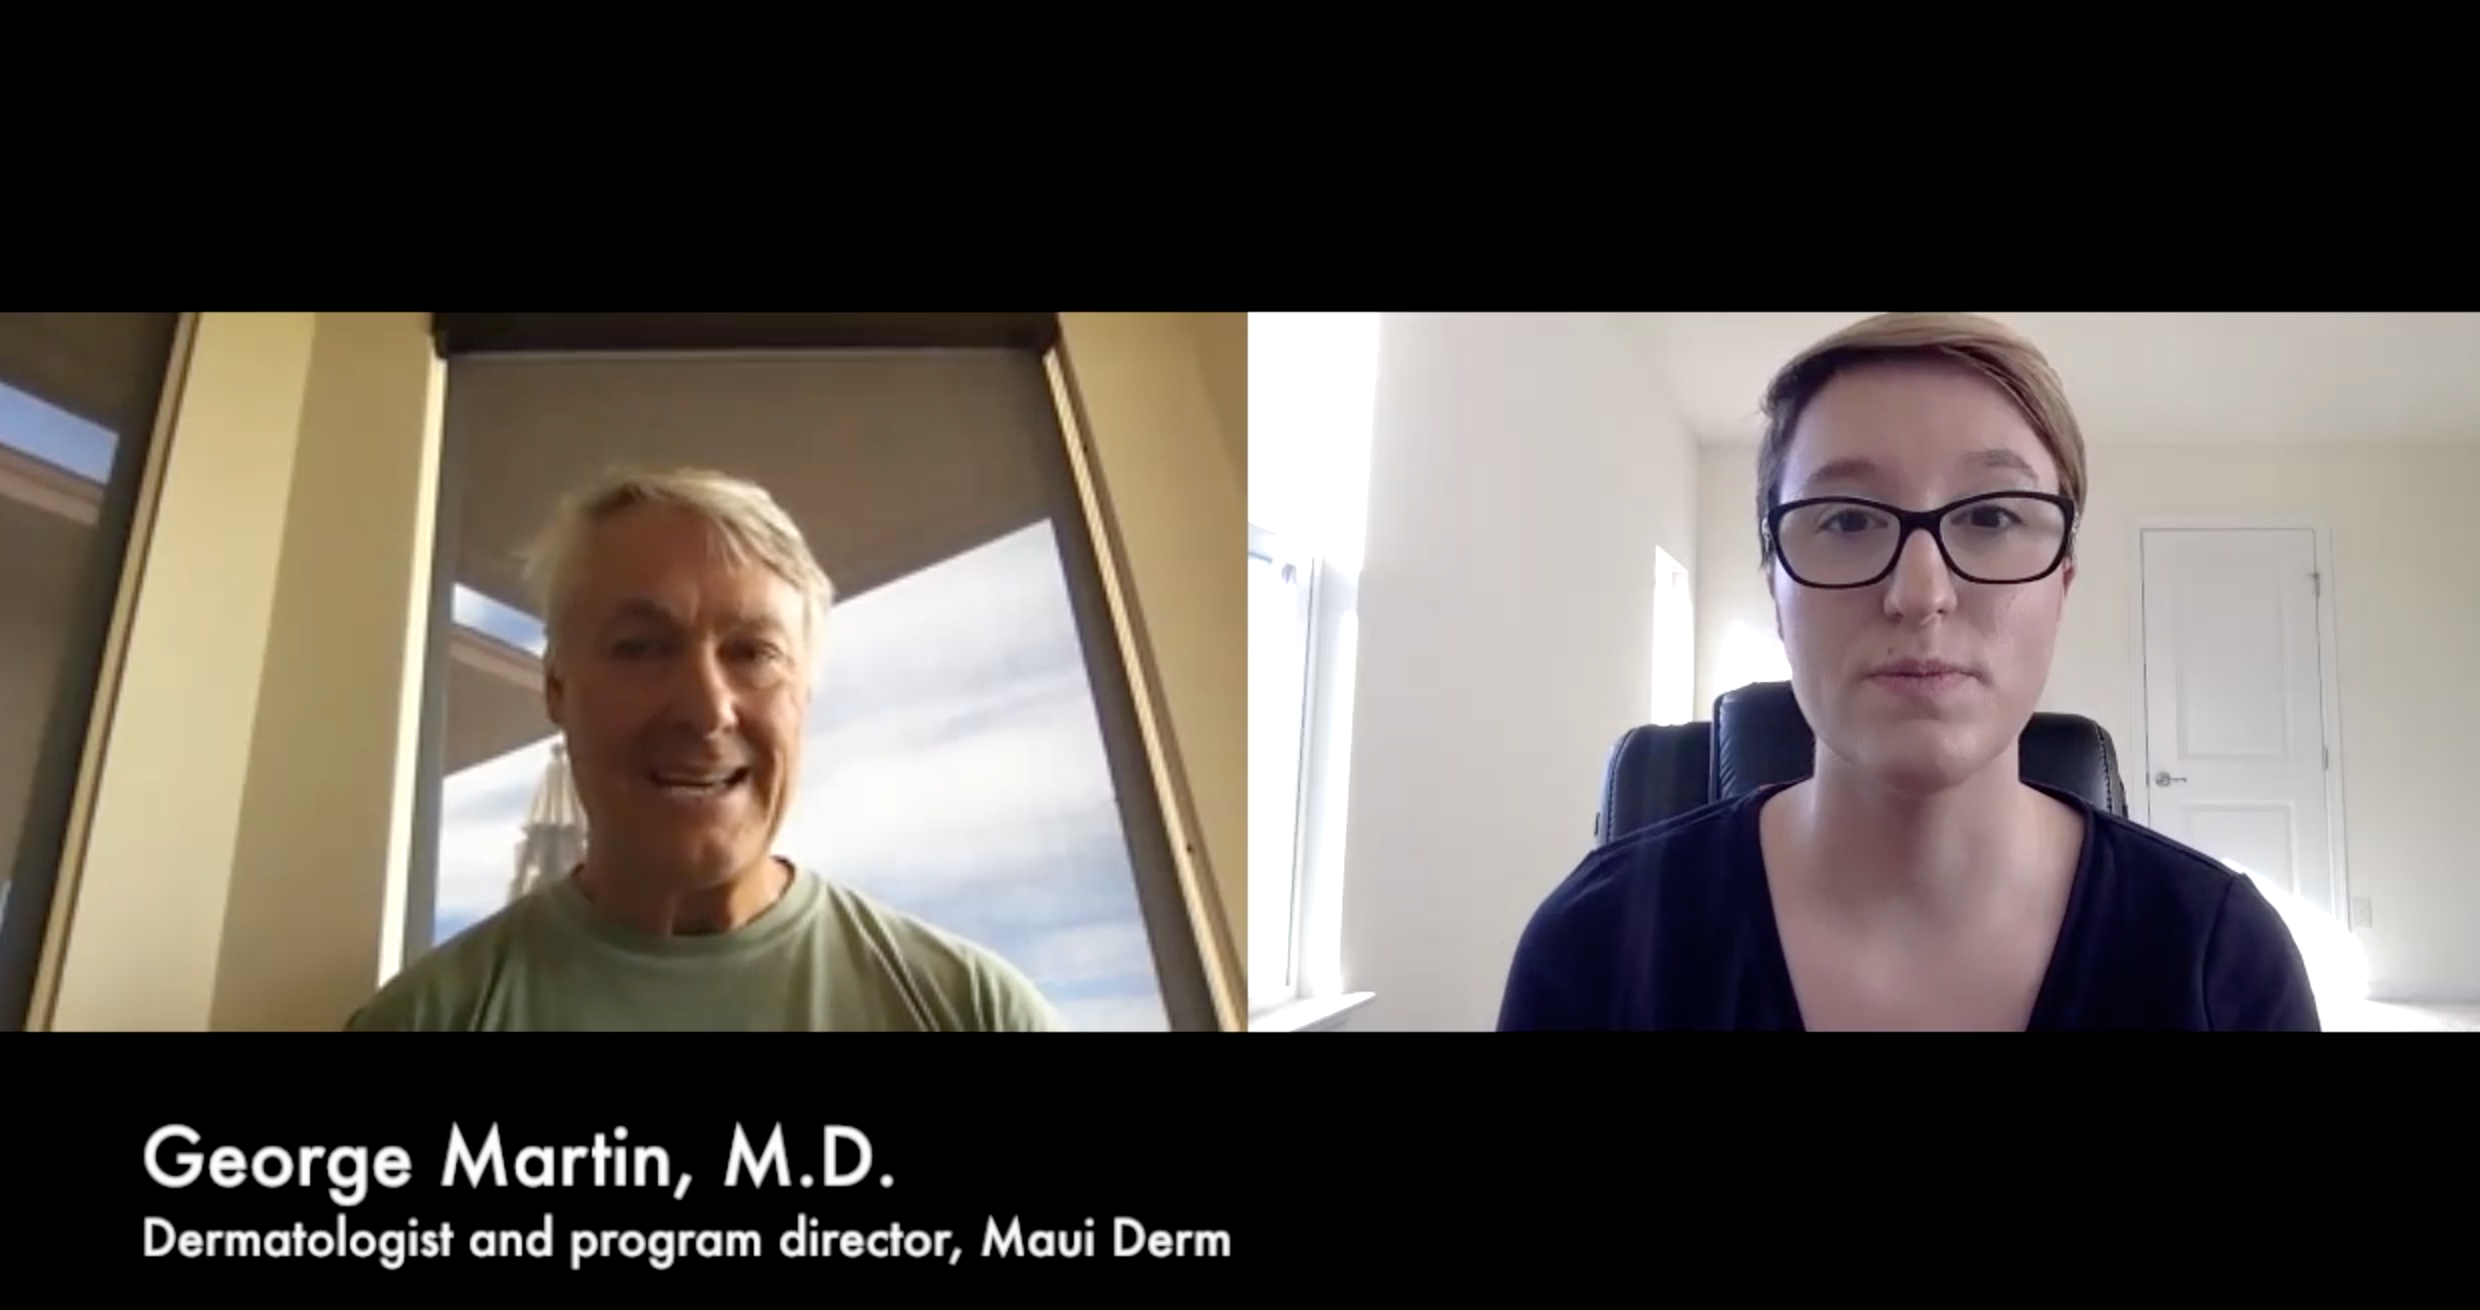 Interview with George Martin, M.D., program director Maui Derm for Dermatologists